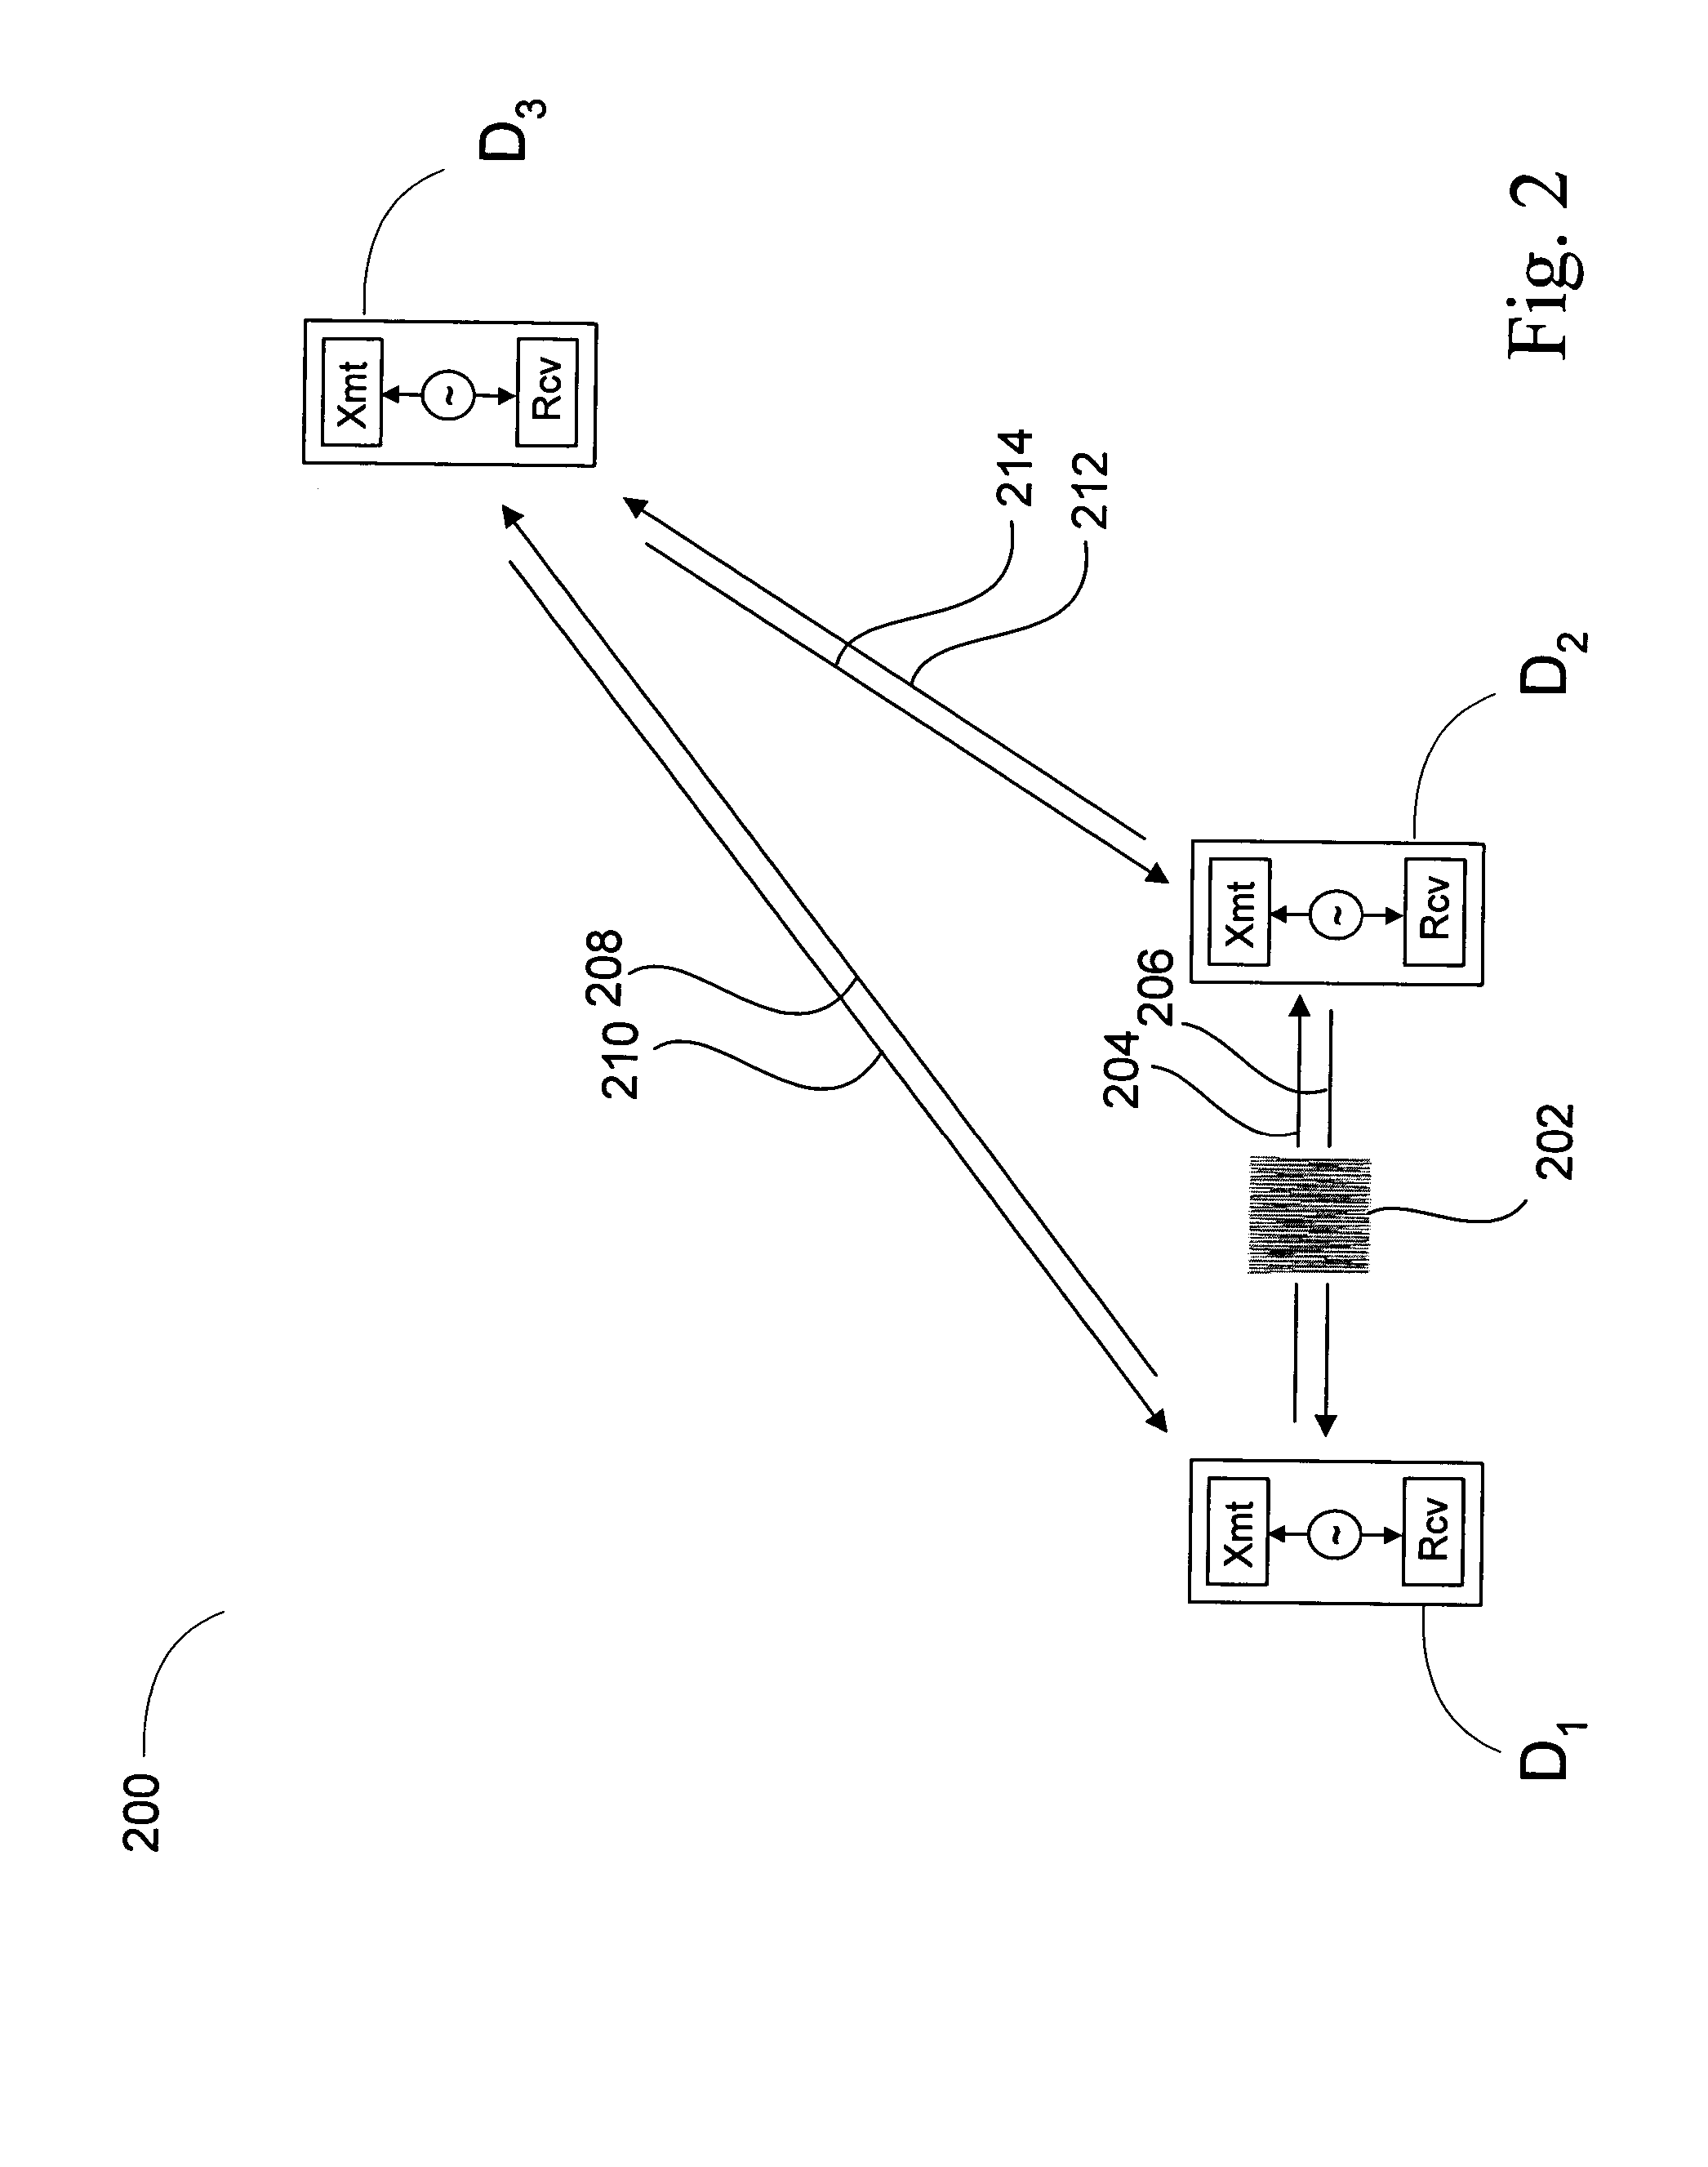 Two-way RF ranging system and method for local positioning